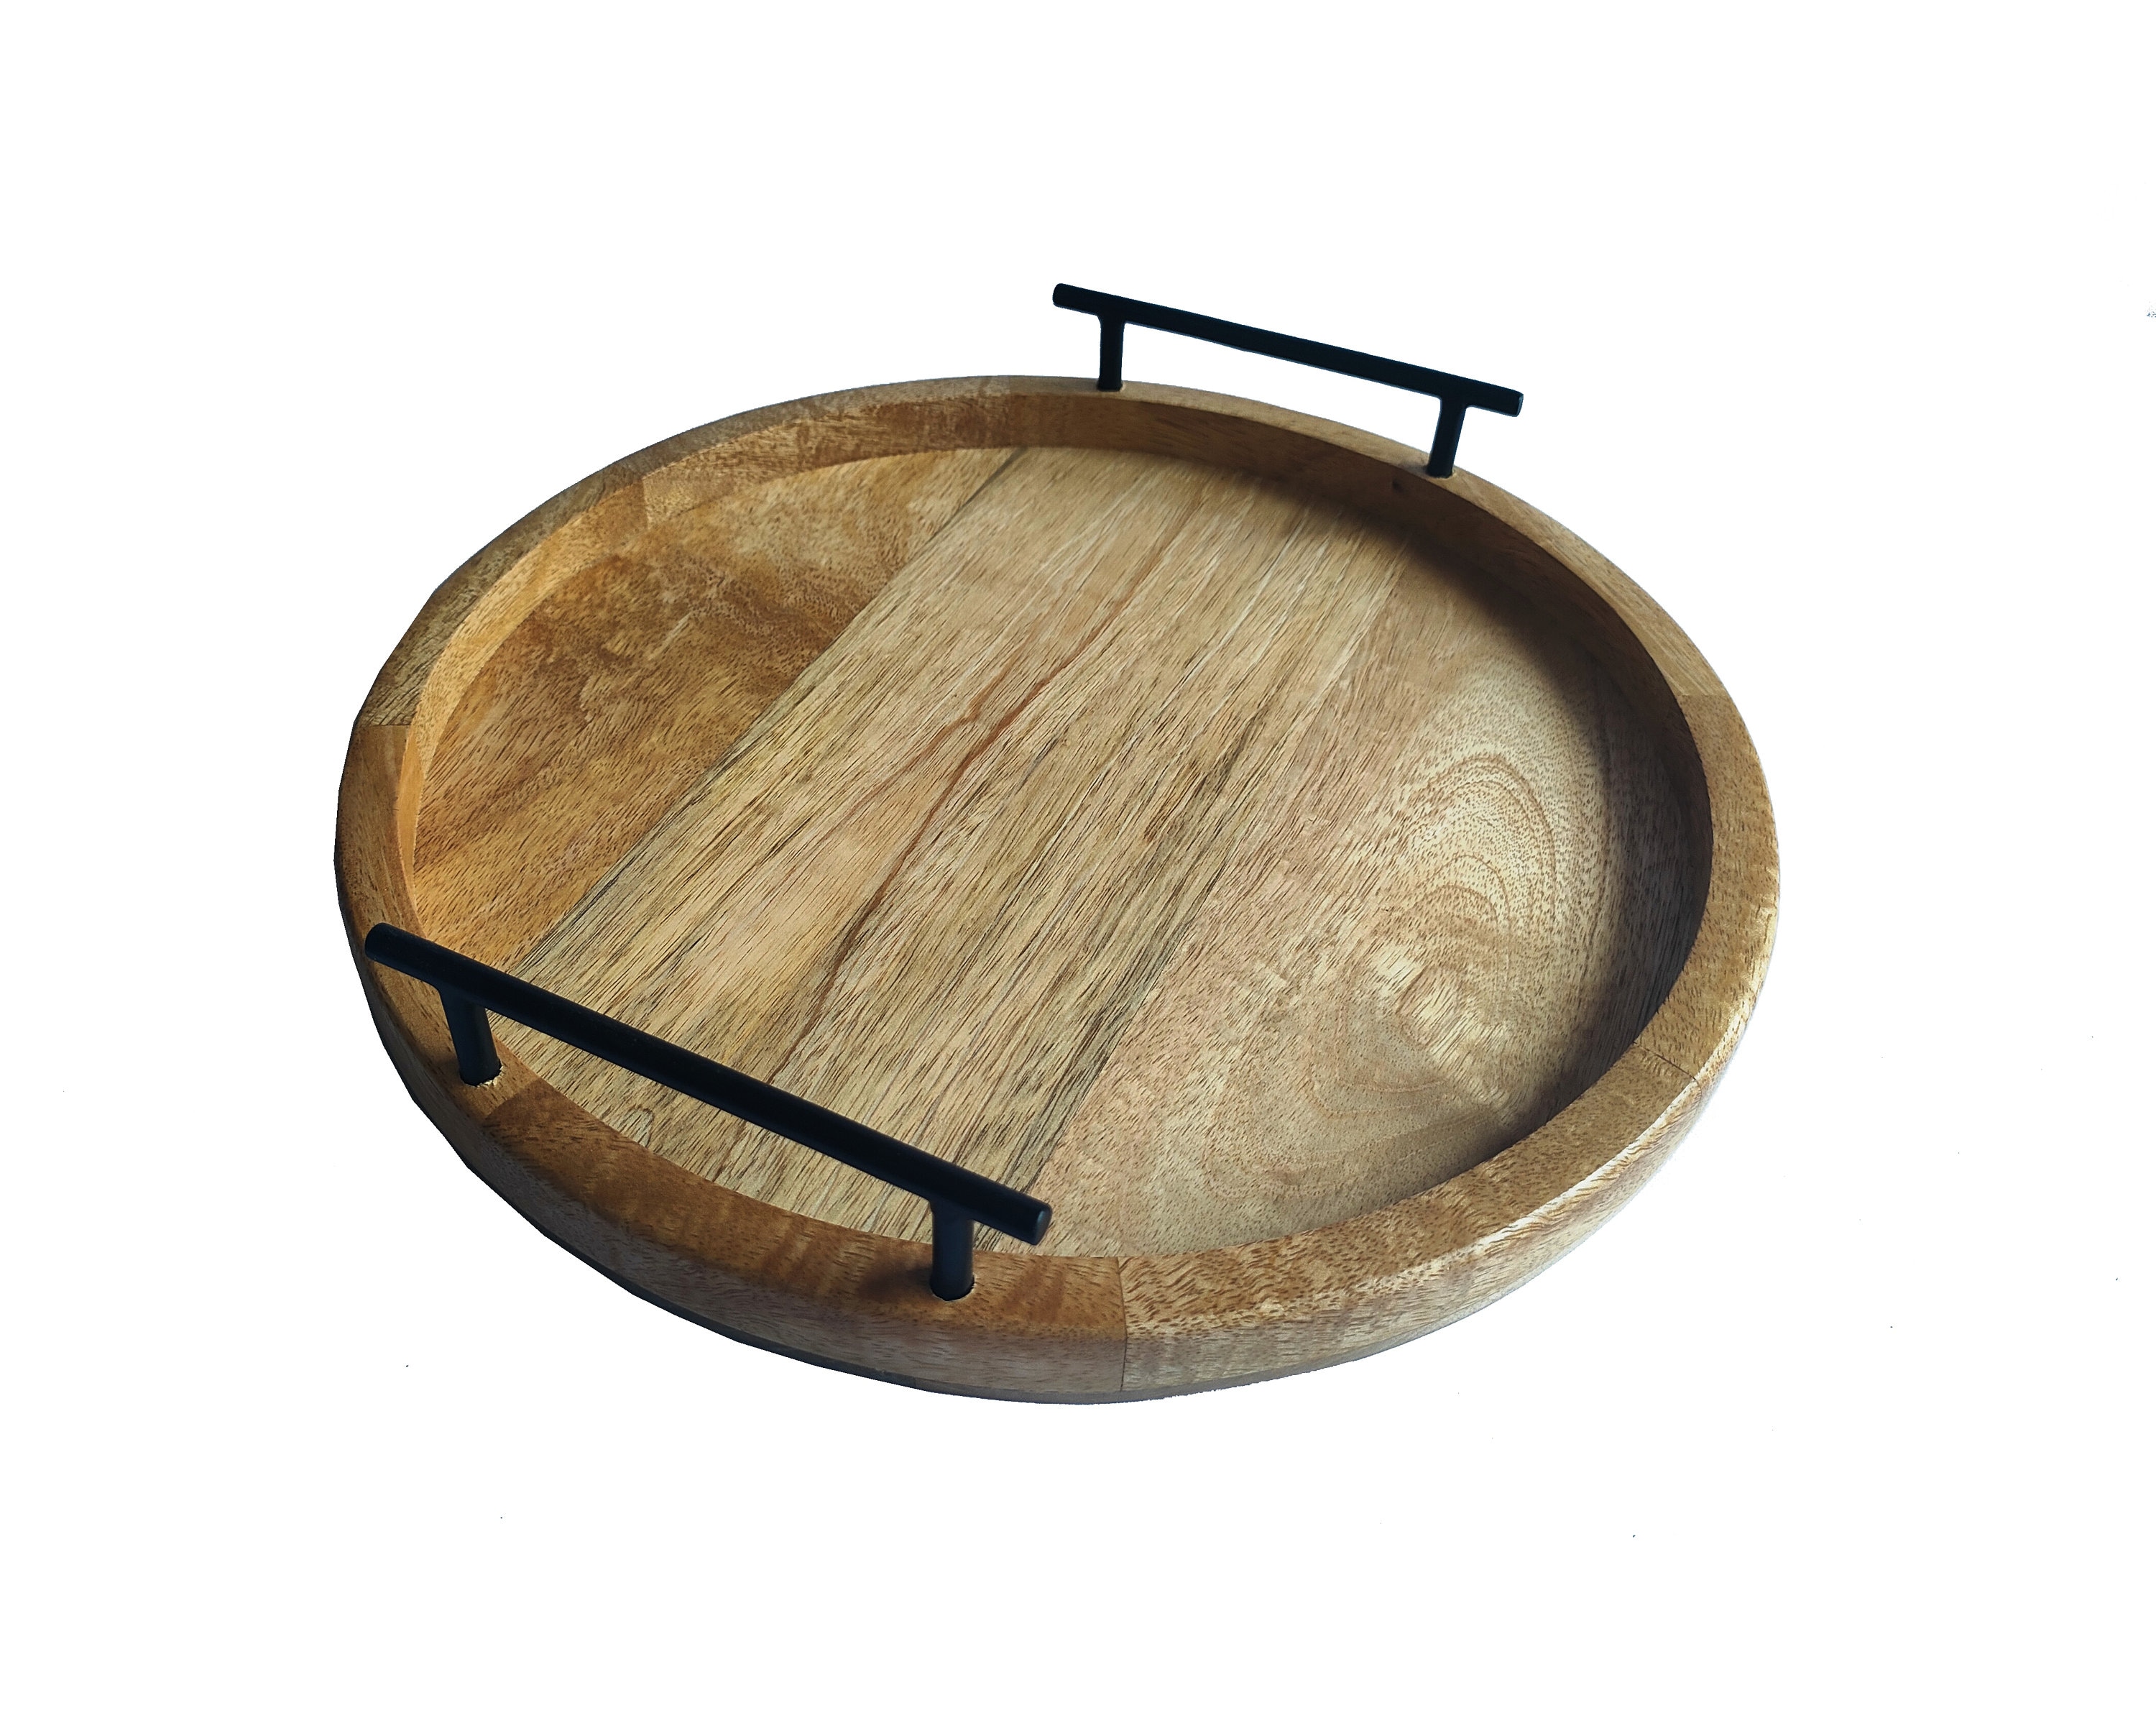 Wooden Round Tray Montessori Tray Outdoor Sorting Tray Wooden